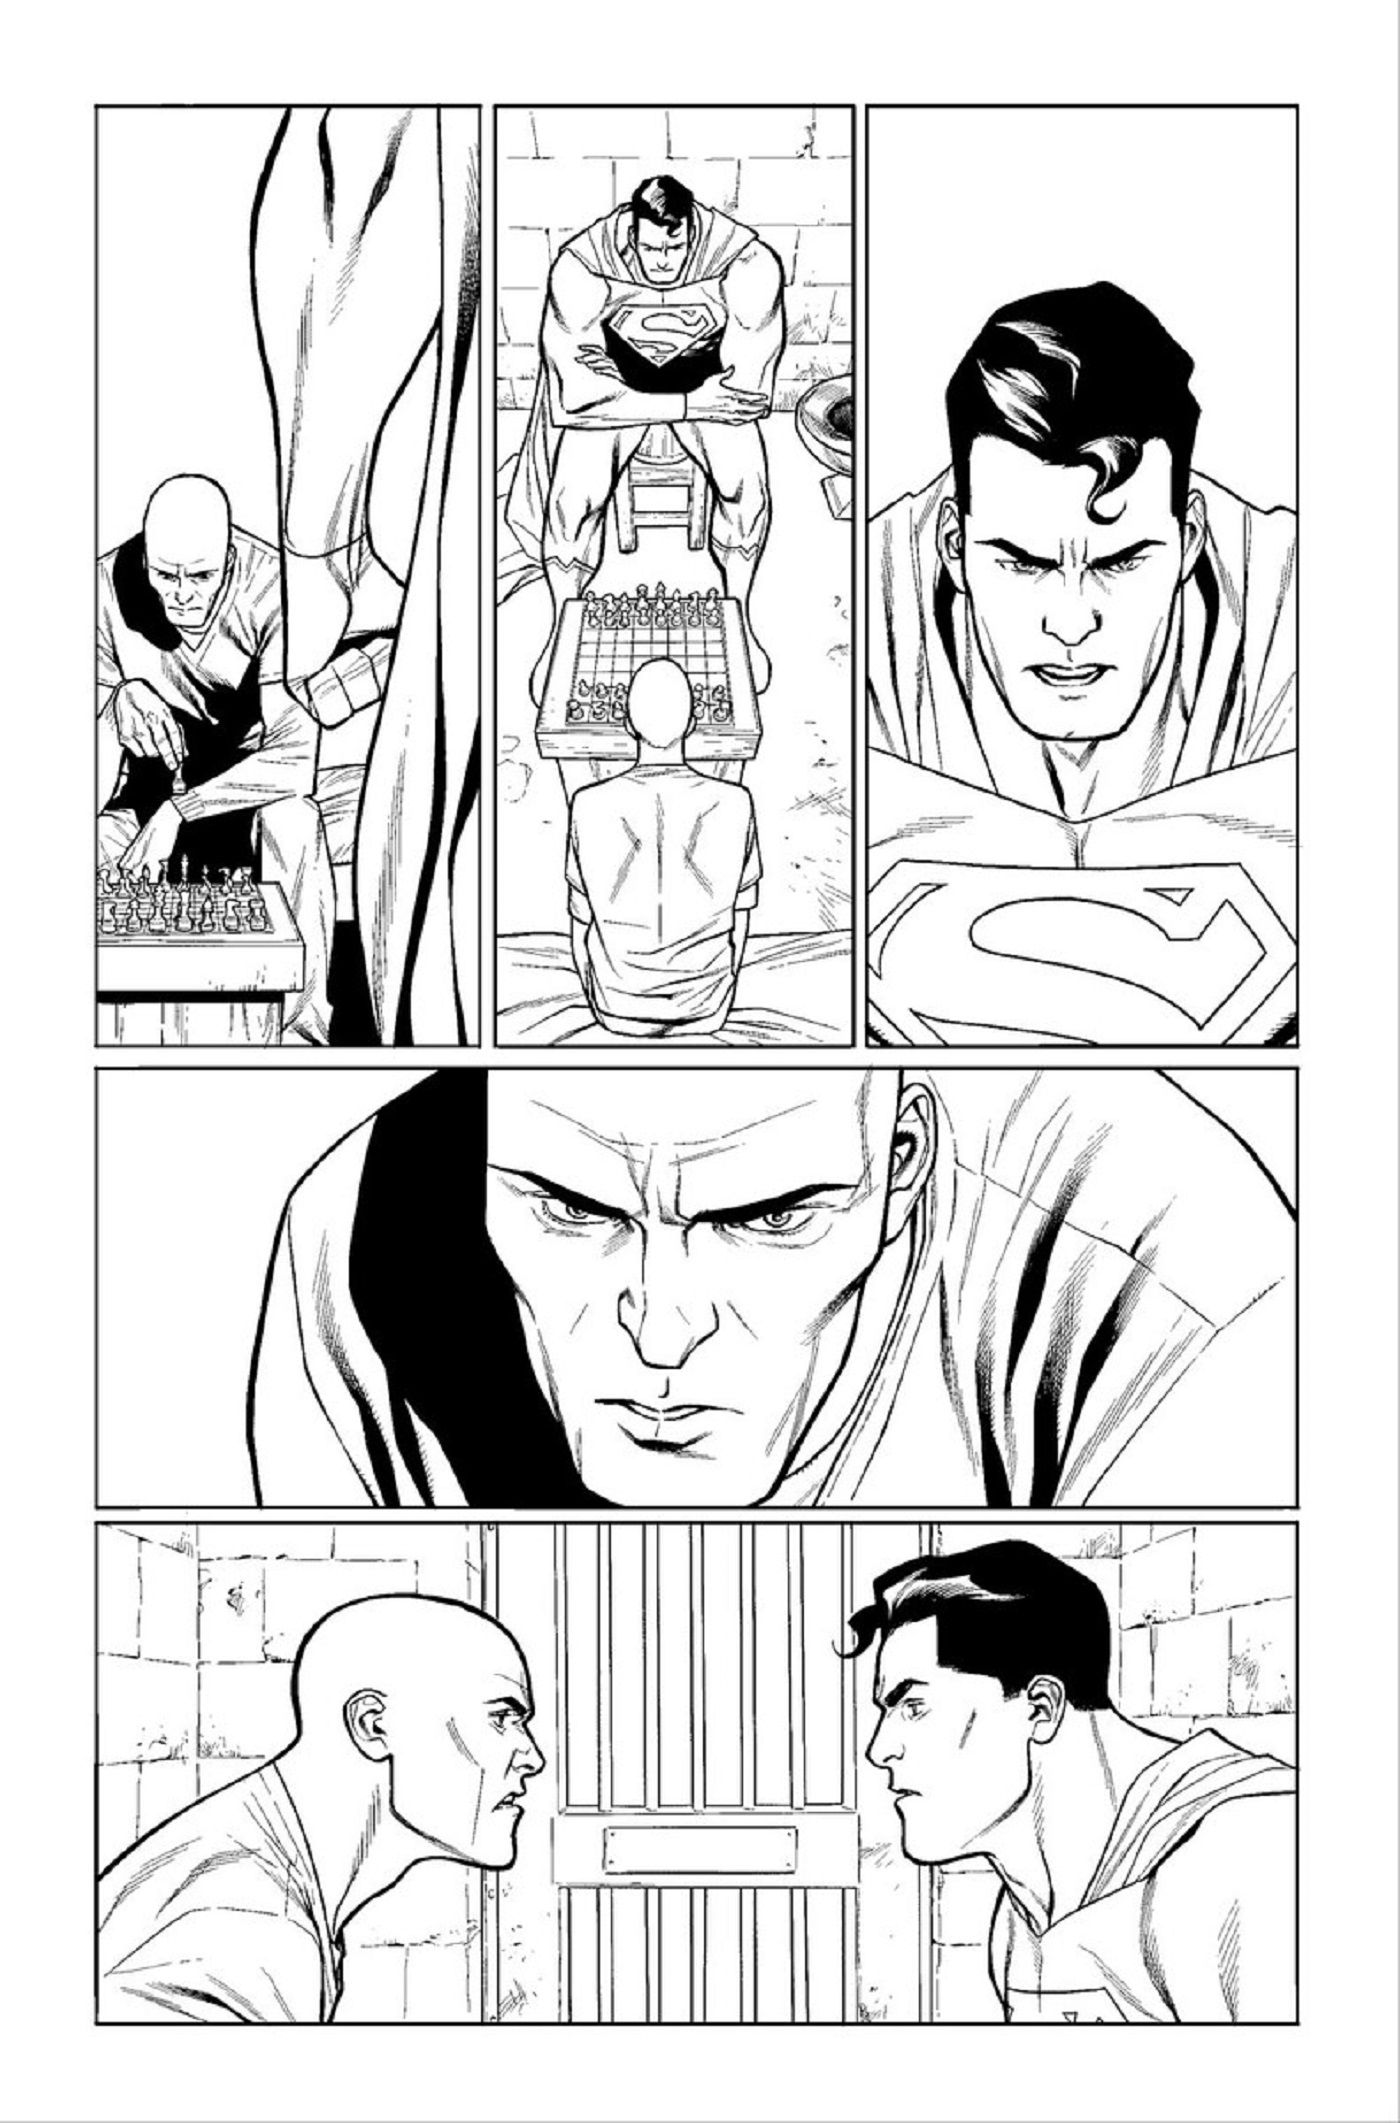 DCs New Superman Finally Meets Lex Luthor in 2021 Annual Preview